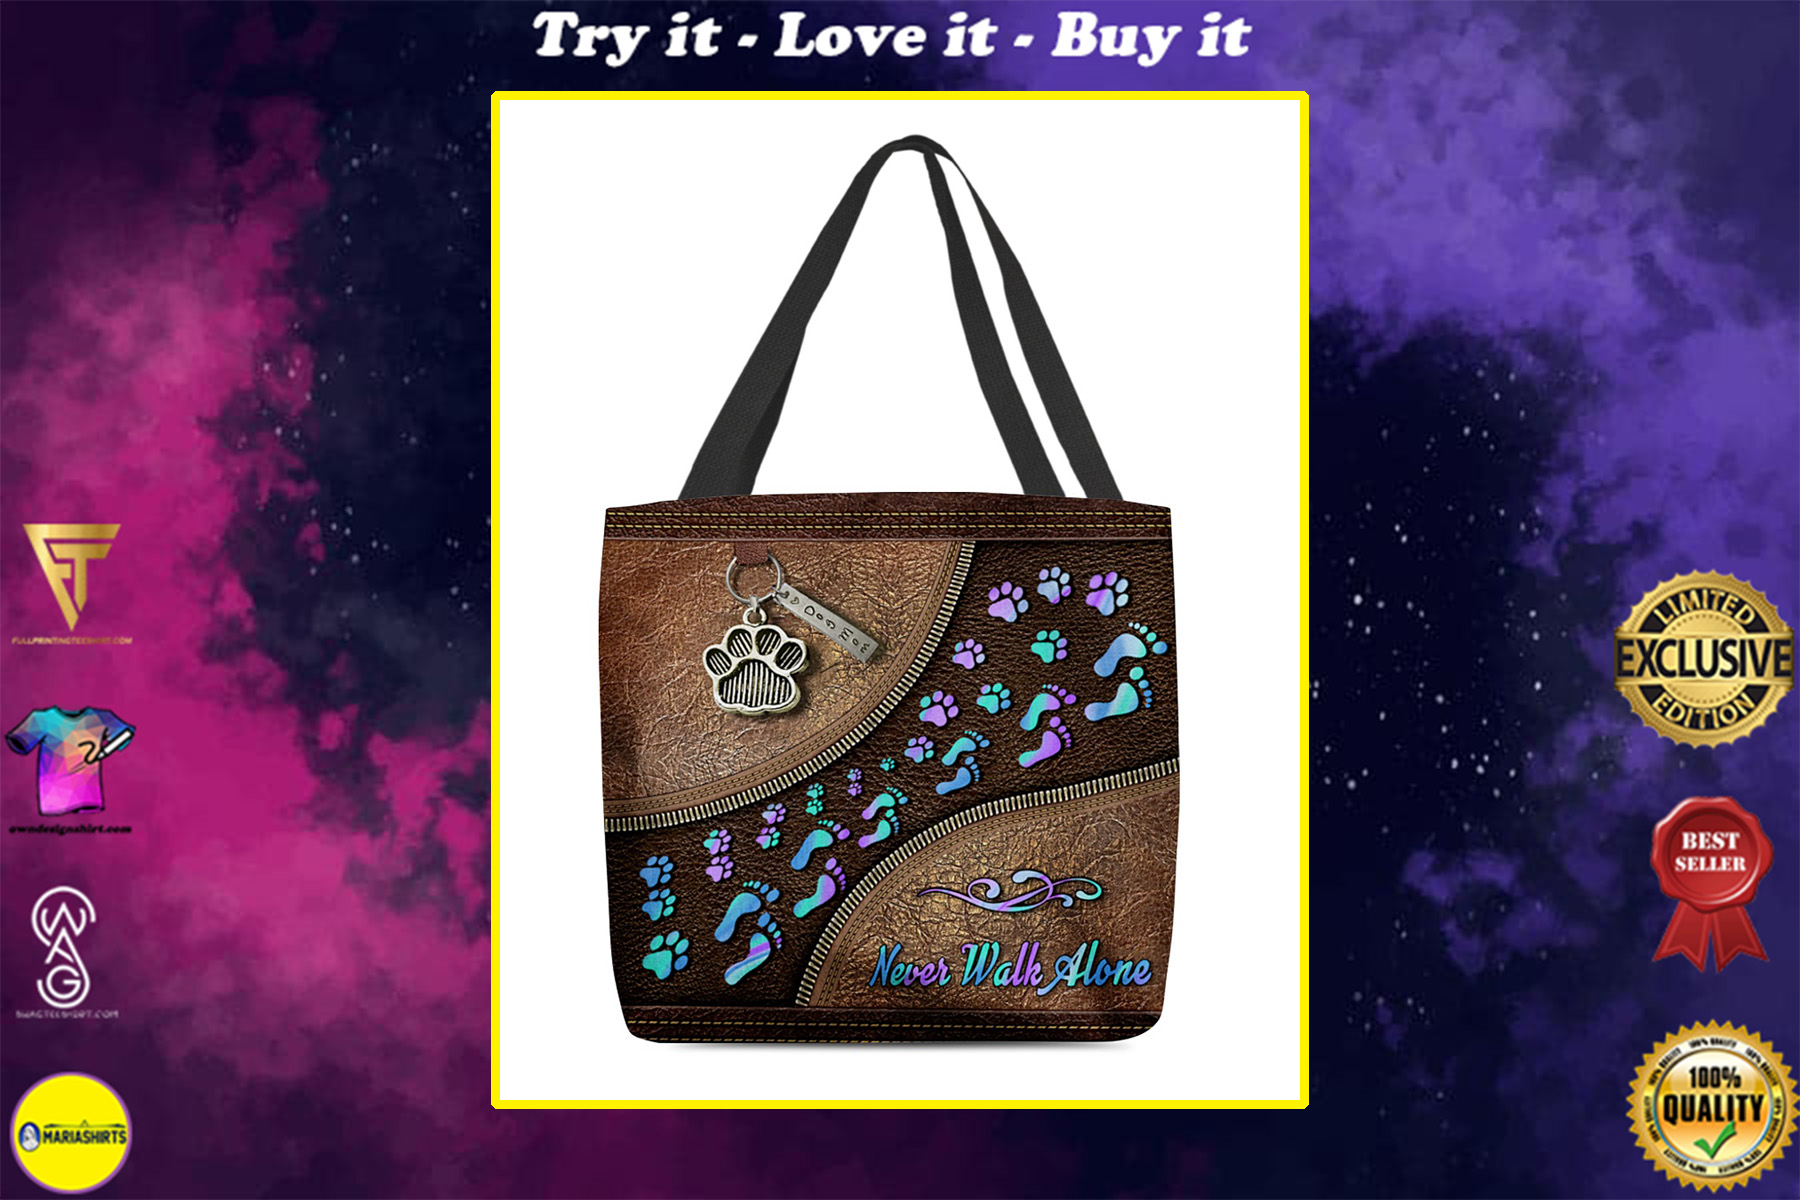 Dog Paw Never Walk Alone Leather Pattern Lined Tote Bag All Over Print 